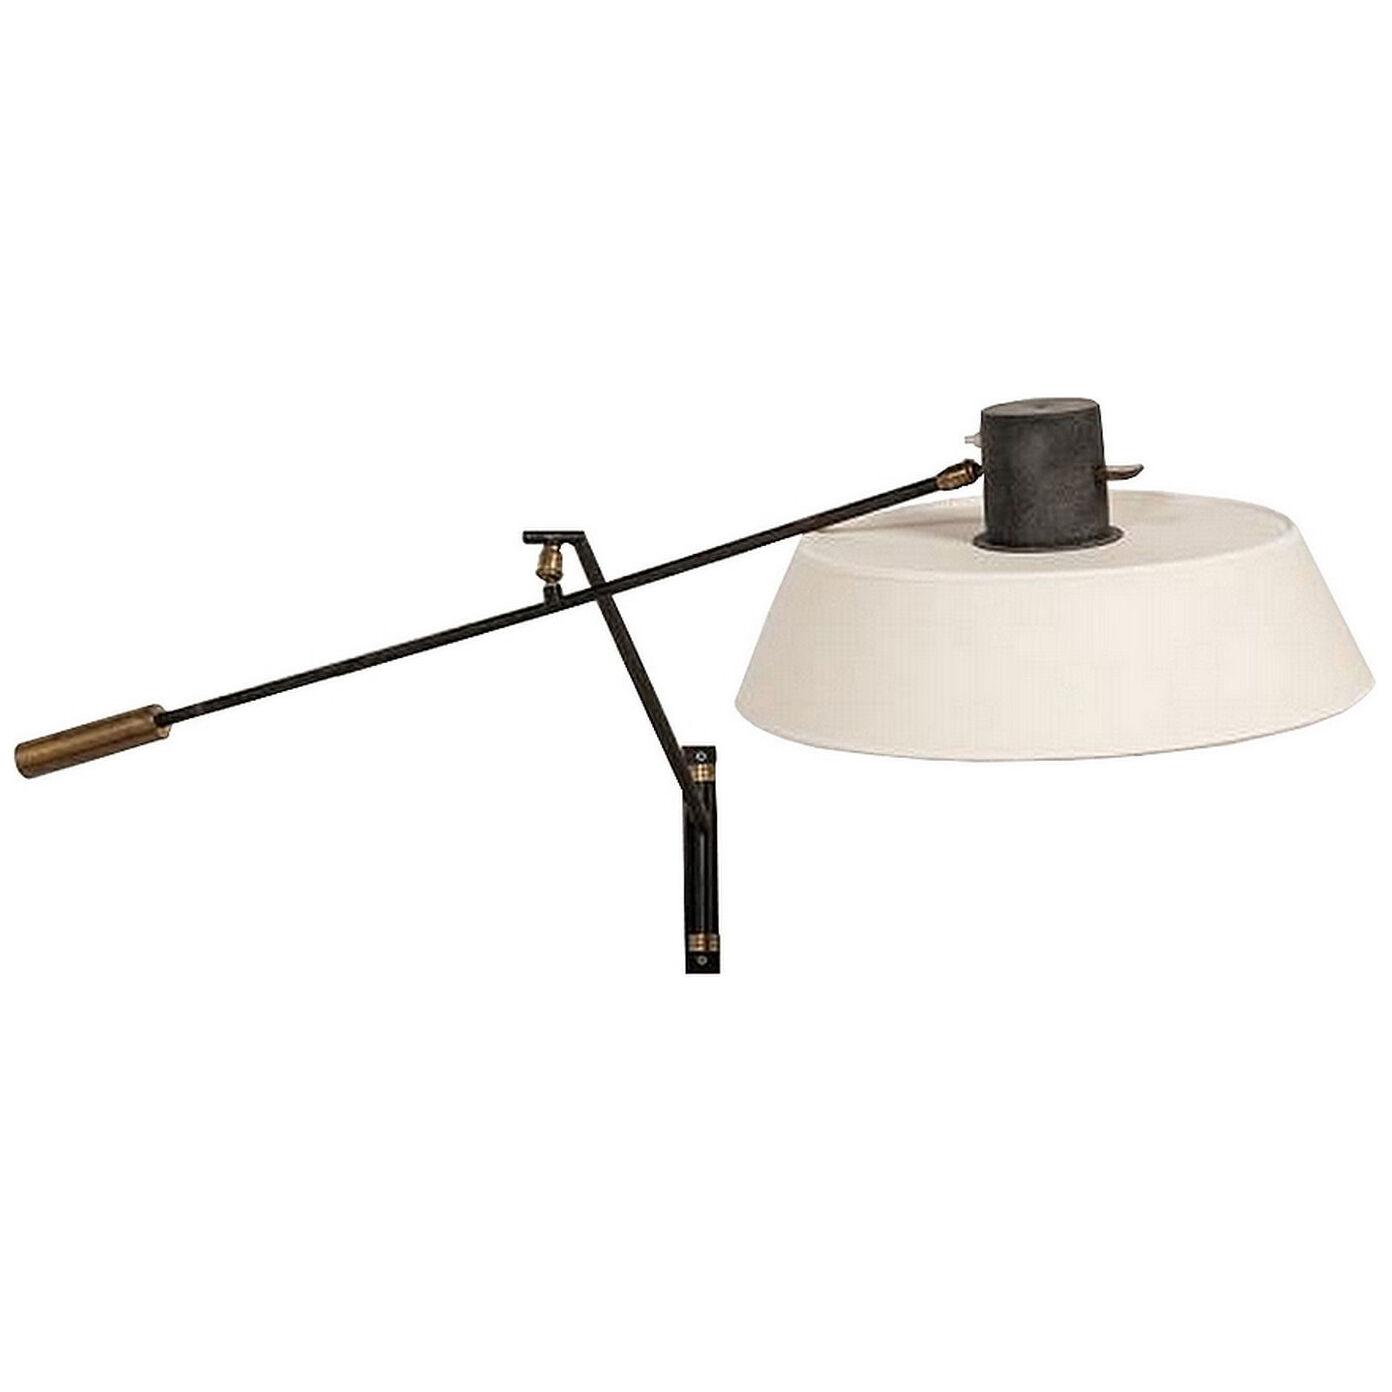 Wall ligth with counterweight, Maison Lunel France circa 1950